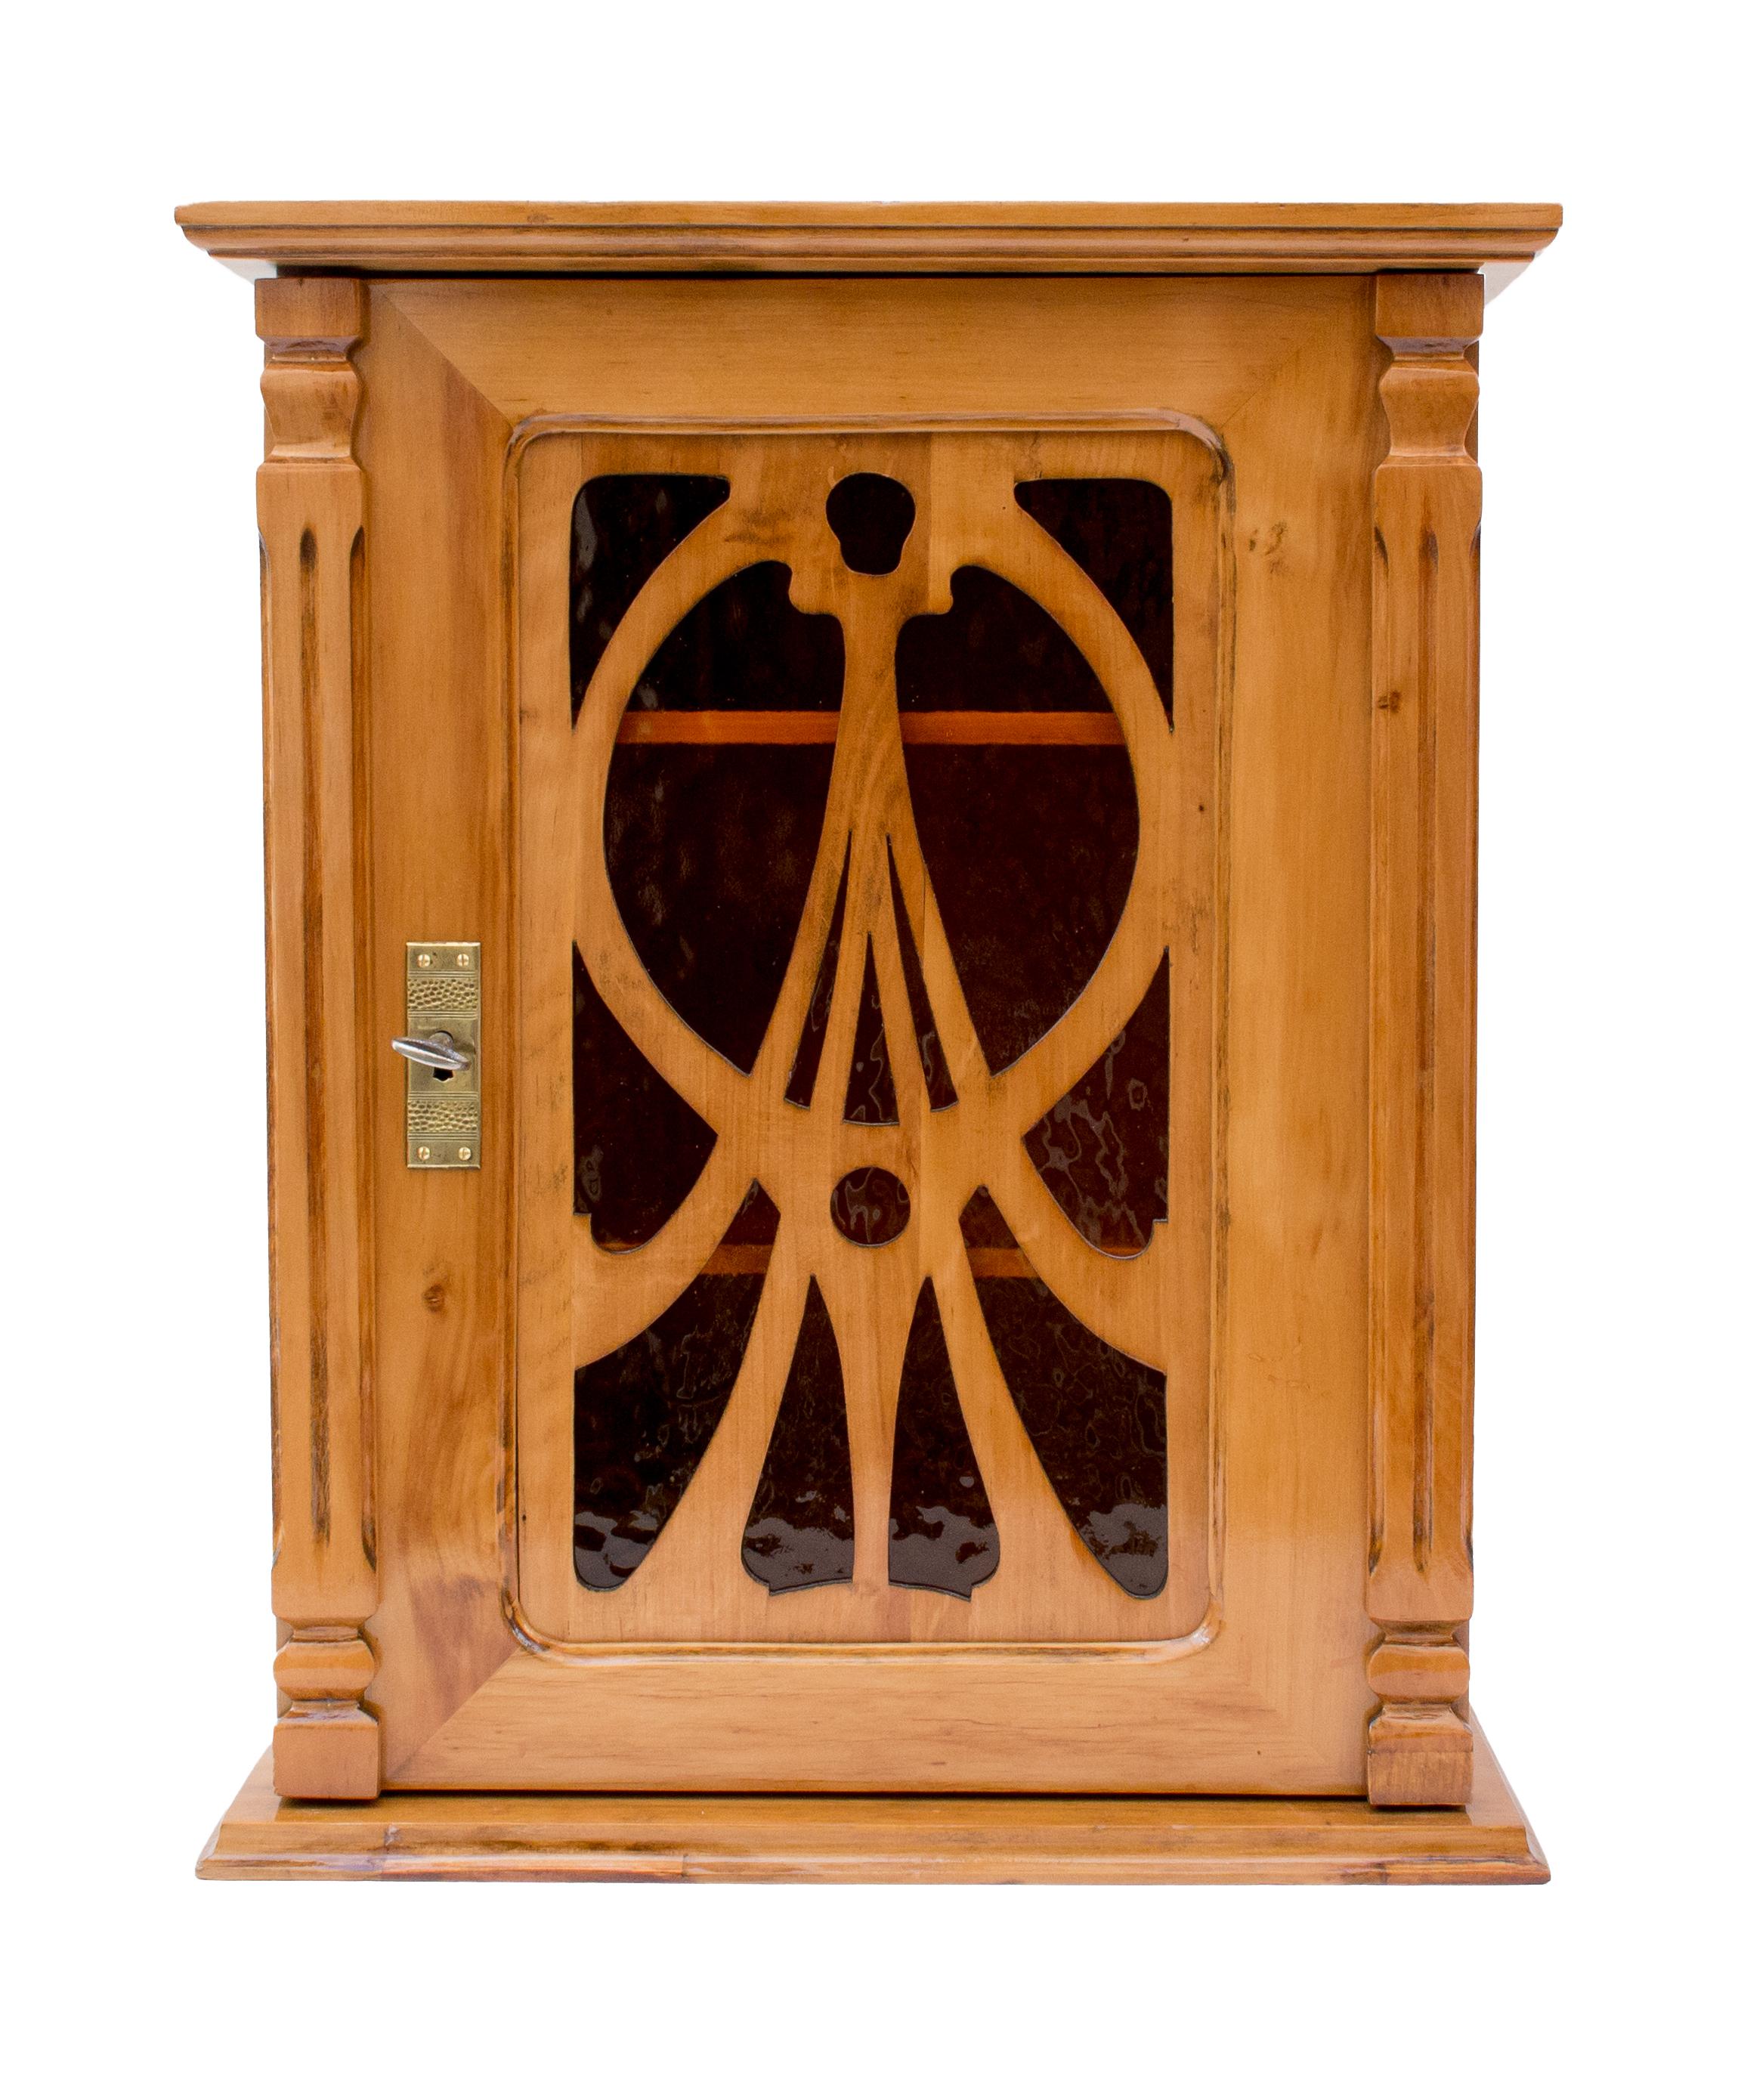 Beautiful hanging wall cabinet from the time of Art Nouveau made of solid plum wood made with the original orange Art Nouveau glass. In very good restored condition.